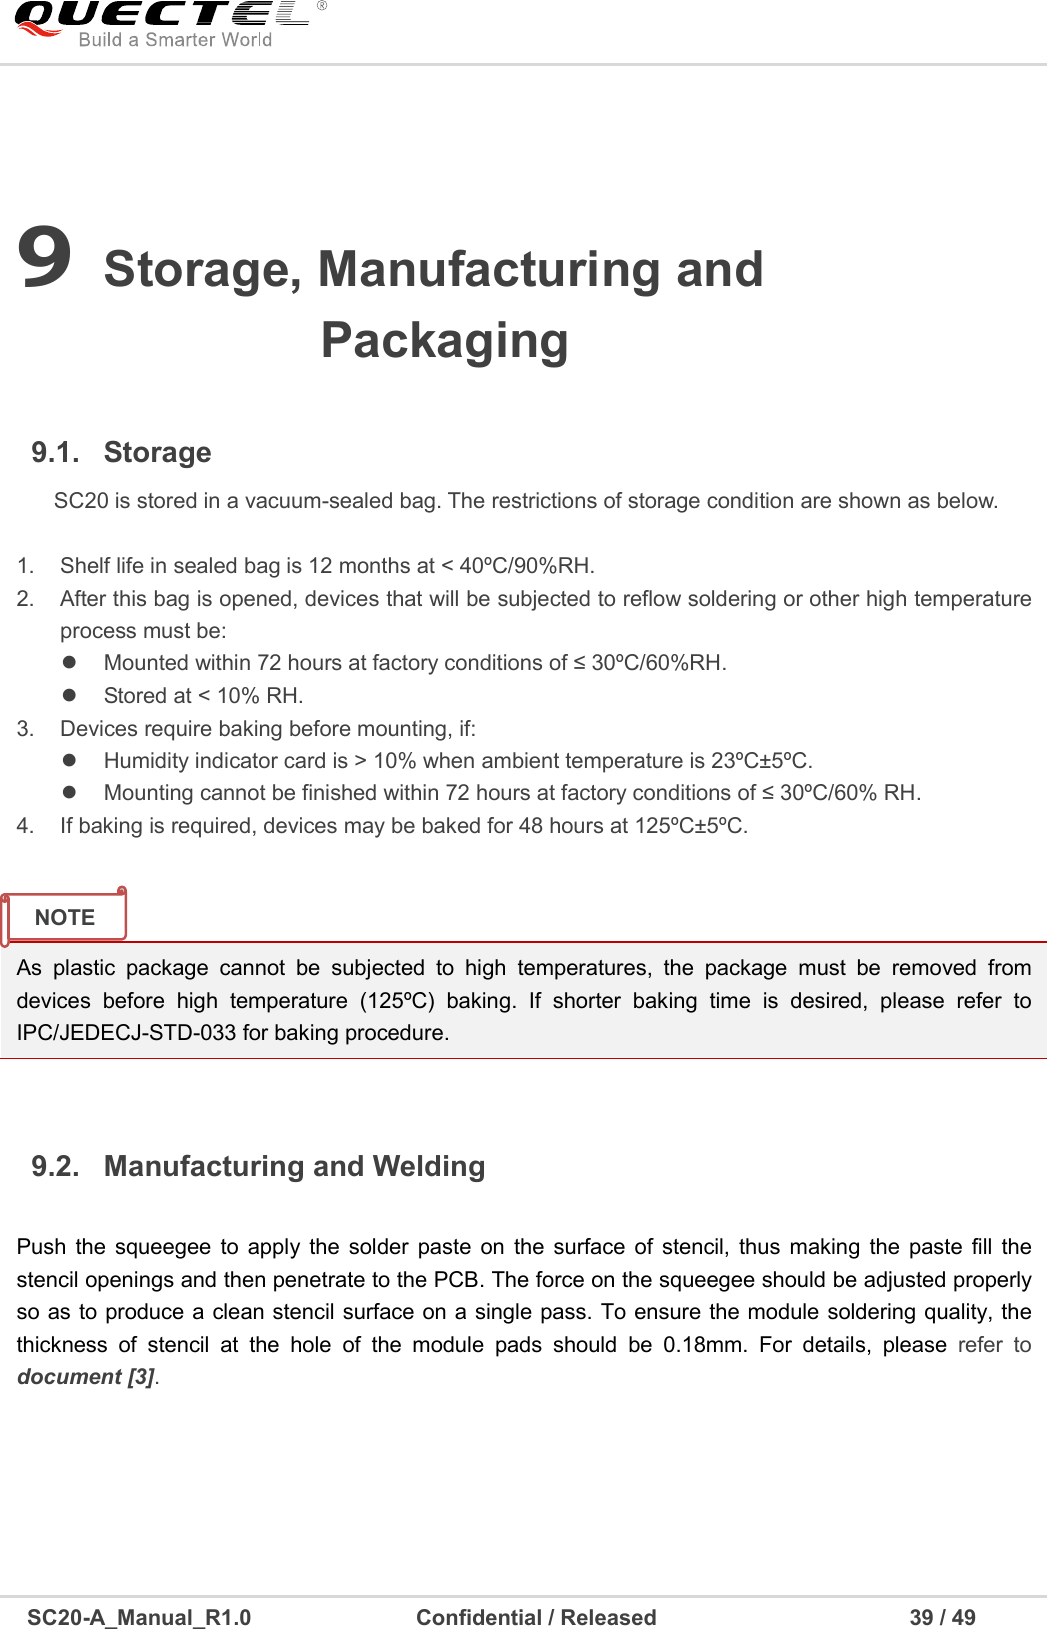     SC20-A_Manual_R1.0                              Confidential / Released                                              39 / 49    9 Storage, Manufacturing and Packaging 9.1.  Storage SC20 is stored in a vacuum-sealed bag. The restrictions of storage condition are shown as below.    1.  Shelf life in sealed bag is 12 months at &lt; 40ºC/90%RH.   2.  After this bag is opened, devices that will be subjected to reflow soldering or other high temperature process must be:   Mounted within 72 hours at factory conditions of ≤ 30ºC/60%RH.   Stored at &lt; 10% RH. 3.  Devices require baking before mounting, if:   Humidity indicator card is &gt; 10% when ambient temperature is 23ºC±5ºC.   Mounting cannot be finished within 72 hours at factory conditions of ≤ 30ºC/60% RH. 4.  If baking is required, devices may be baked for 48 hours at 125ºC±5ºC.    9.2.  Manufacturing and Welding  Push  the  squeegee to  apply the  solder  paste  on  the  surface  of  stencil,  thus  making  the  paste  fill  the stencil openings and then penetrate to the PCB. The force on the squeegee should be adjusted properly so as to produce a clean stencil surface on a single pass. To ensure the module soldering quality, the thickness  of  stencil  at  the  hole  of  the  module  pads  should  be  0.18mm.  For  details,  please  refer  to document [3].        As  plastic  package  cannot  be  subjected  to  high  temperatures,  the  package  must  be  removed  from devices  before  high  temperature  (125ºC)  baking.  If  shorter  baking  time  is  desired,  please  refer  to IPC/JEDECJ-STD-033 for baking procedure. NOTE  